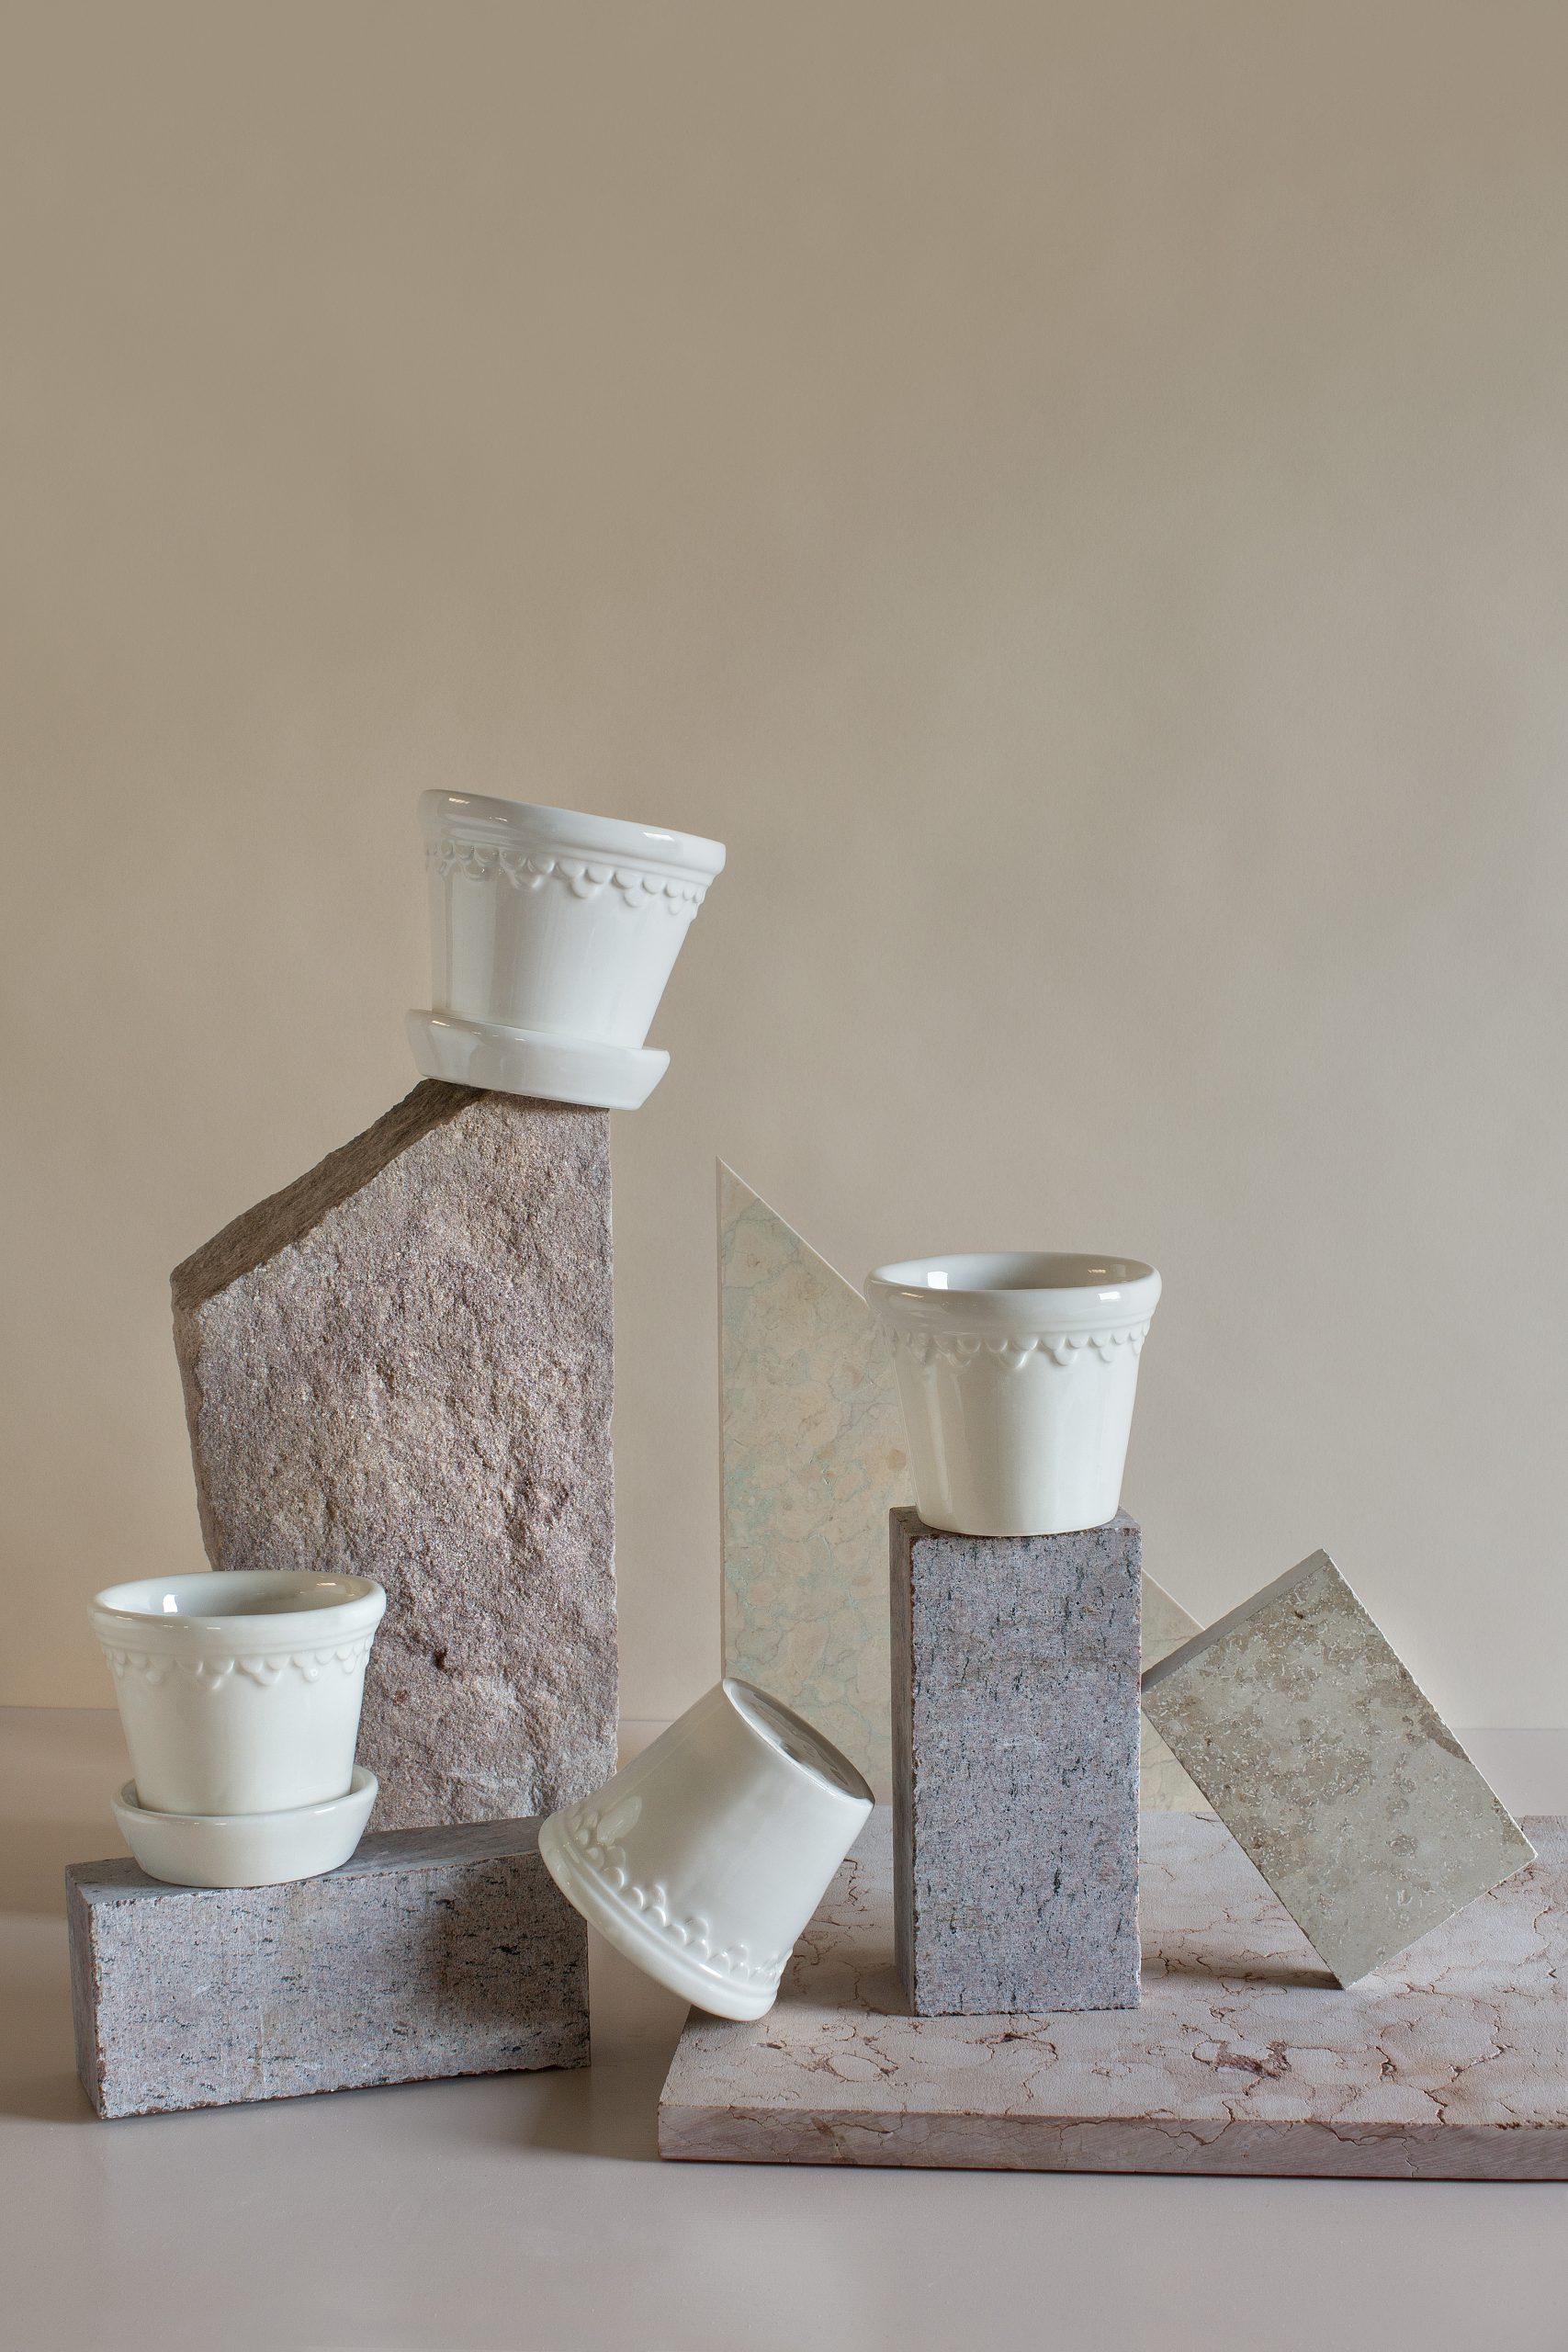 Four glazed white pots are arranged on and around stones.